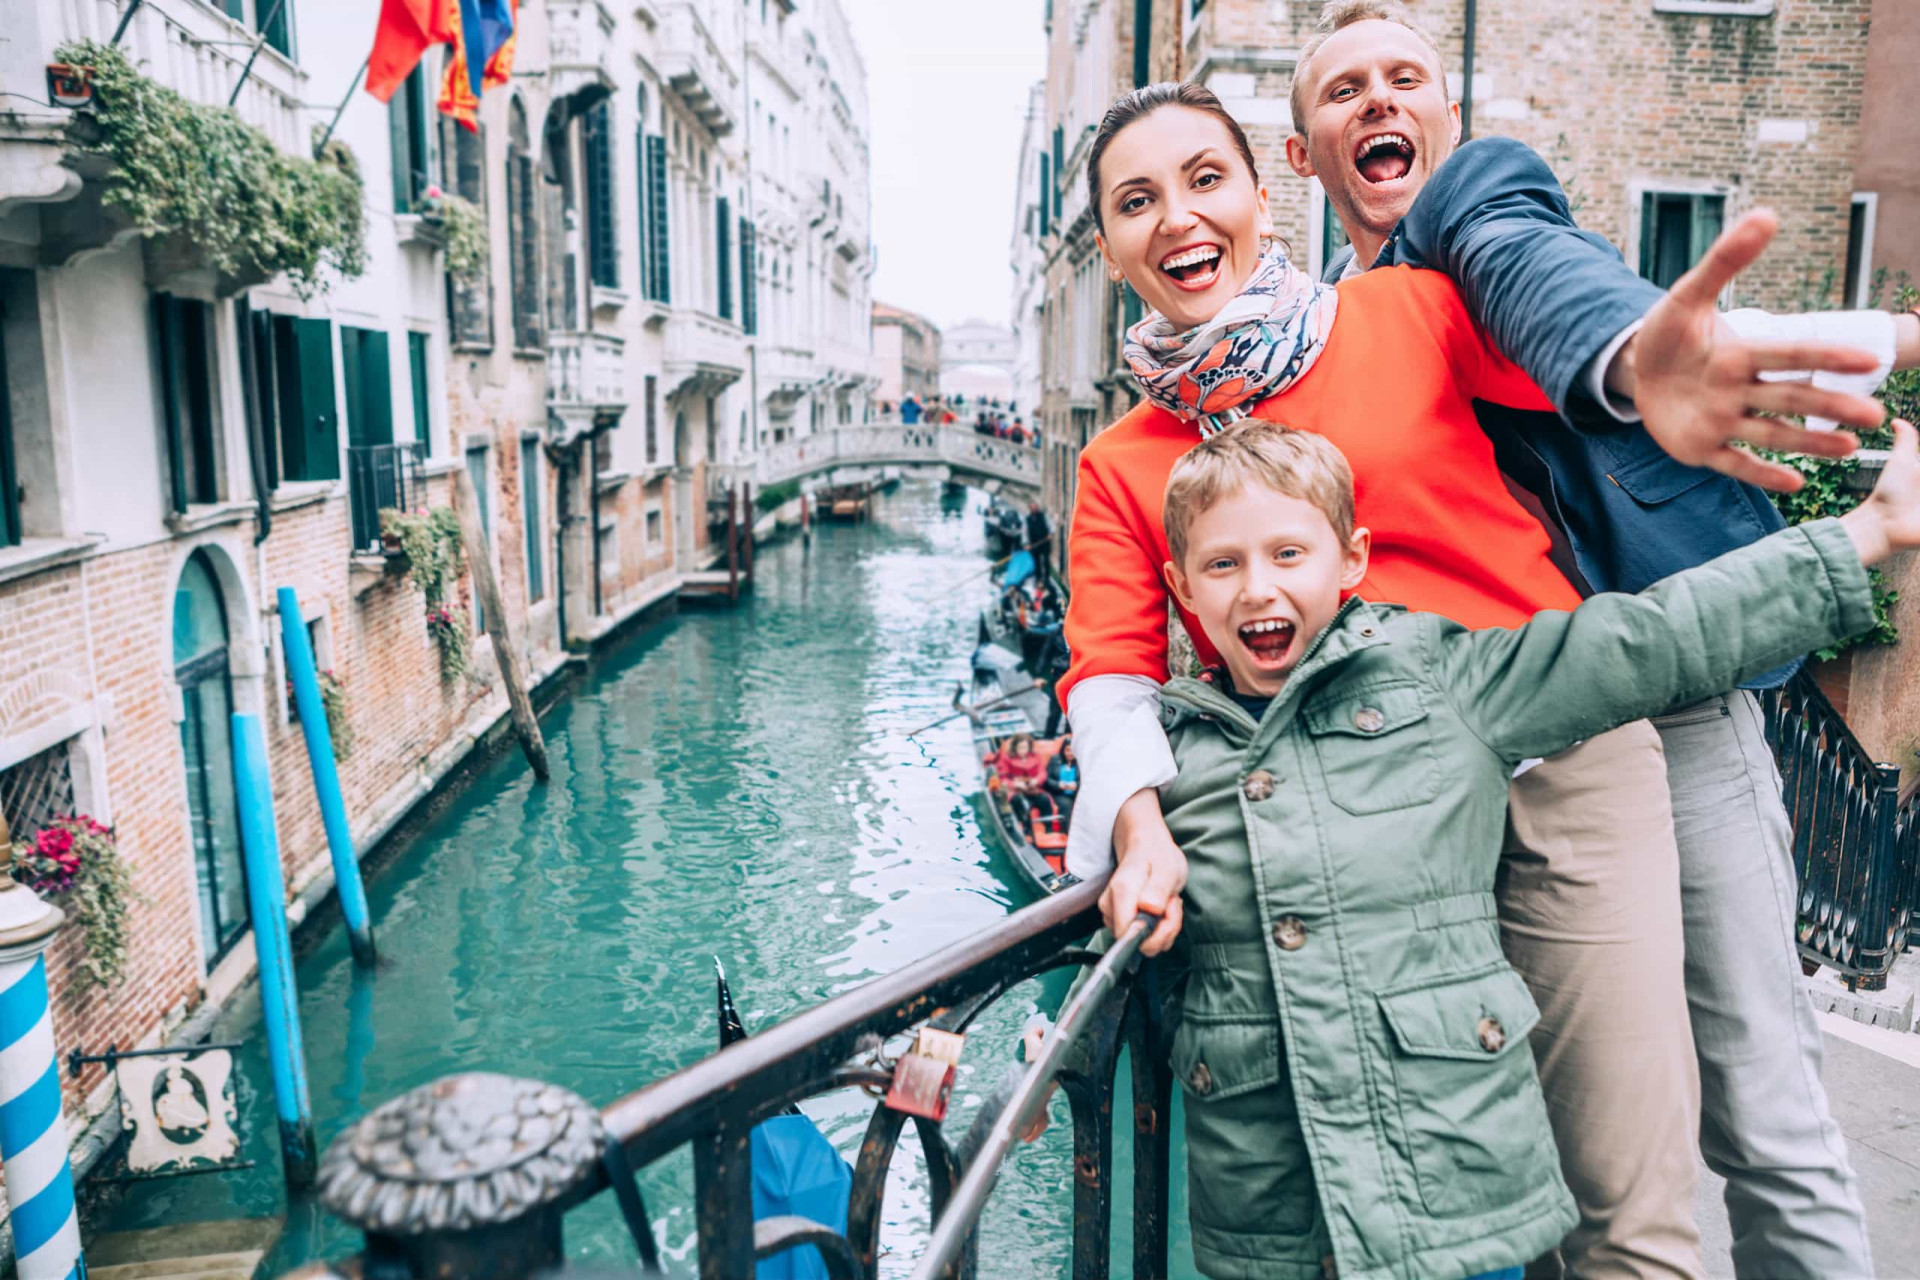 <p>Car-free streets, epic ice creams, and the chance to explore the city by taxi-boat, Venice is an exciting city for families! The excellent pizza and pasta takes the stress out of dining out, too. </p>